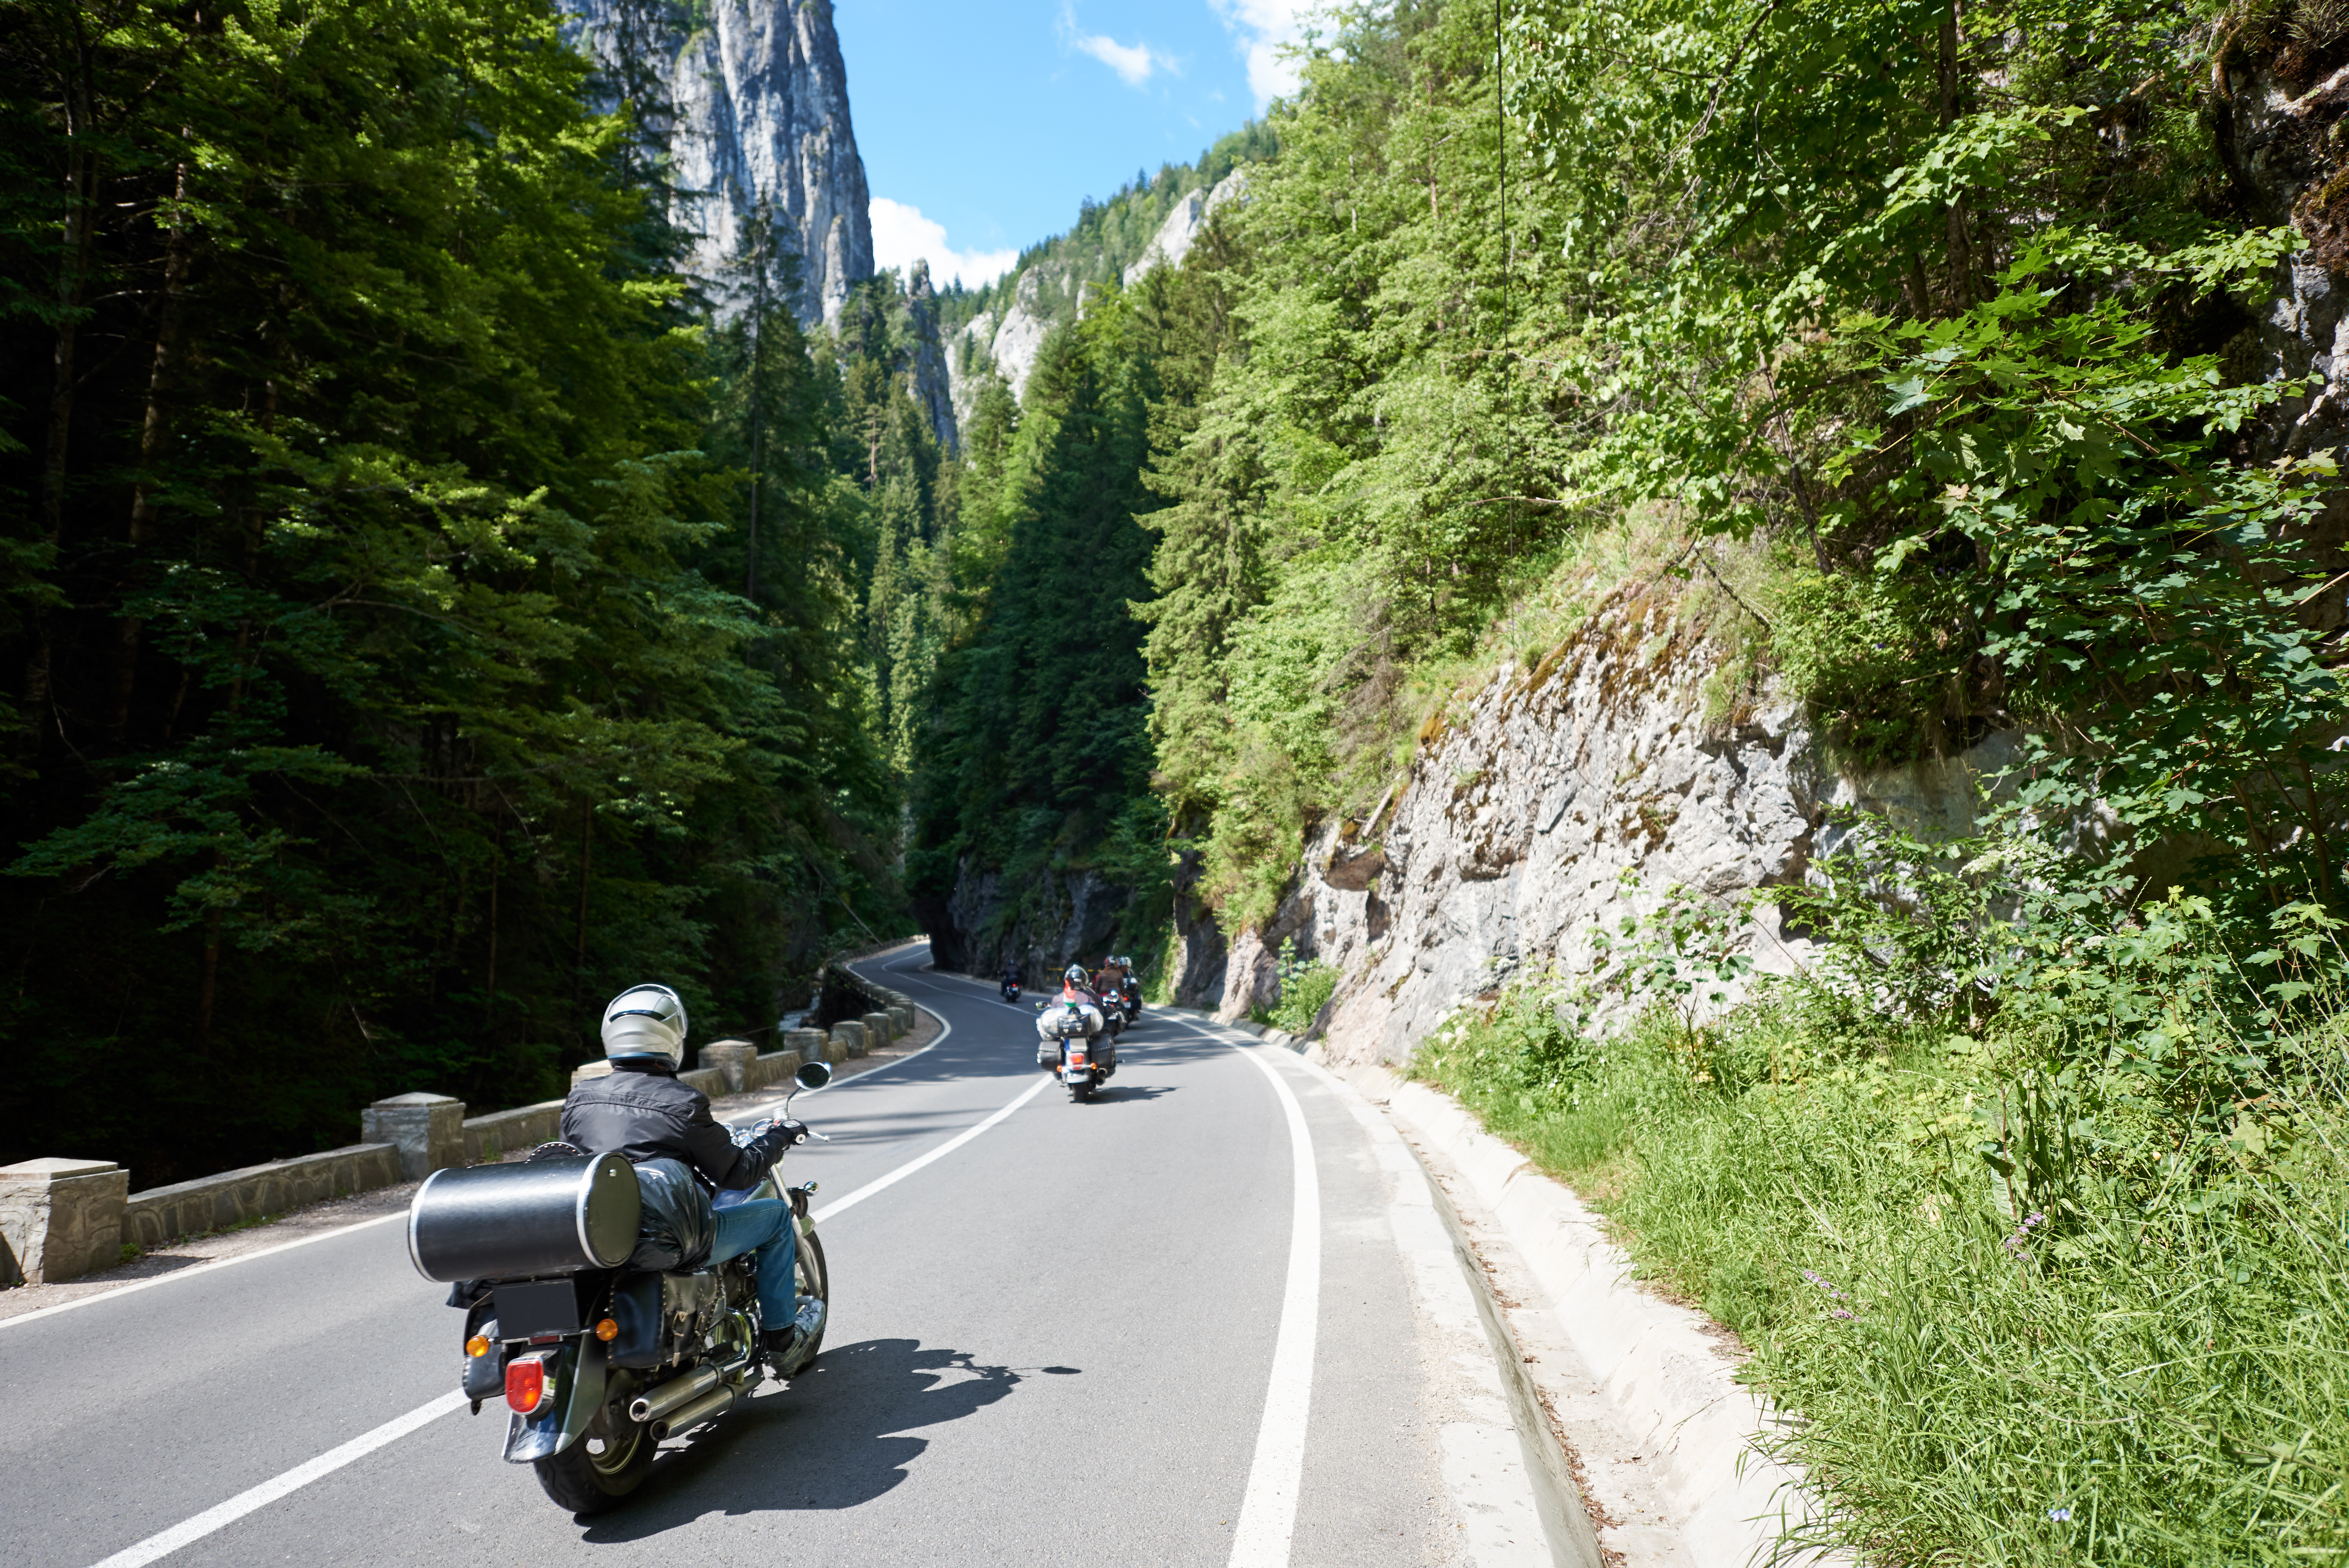 Bikers traveling on motorcycles on mountain road.